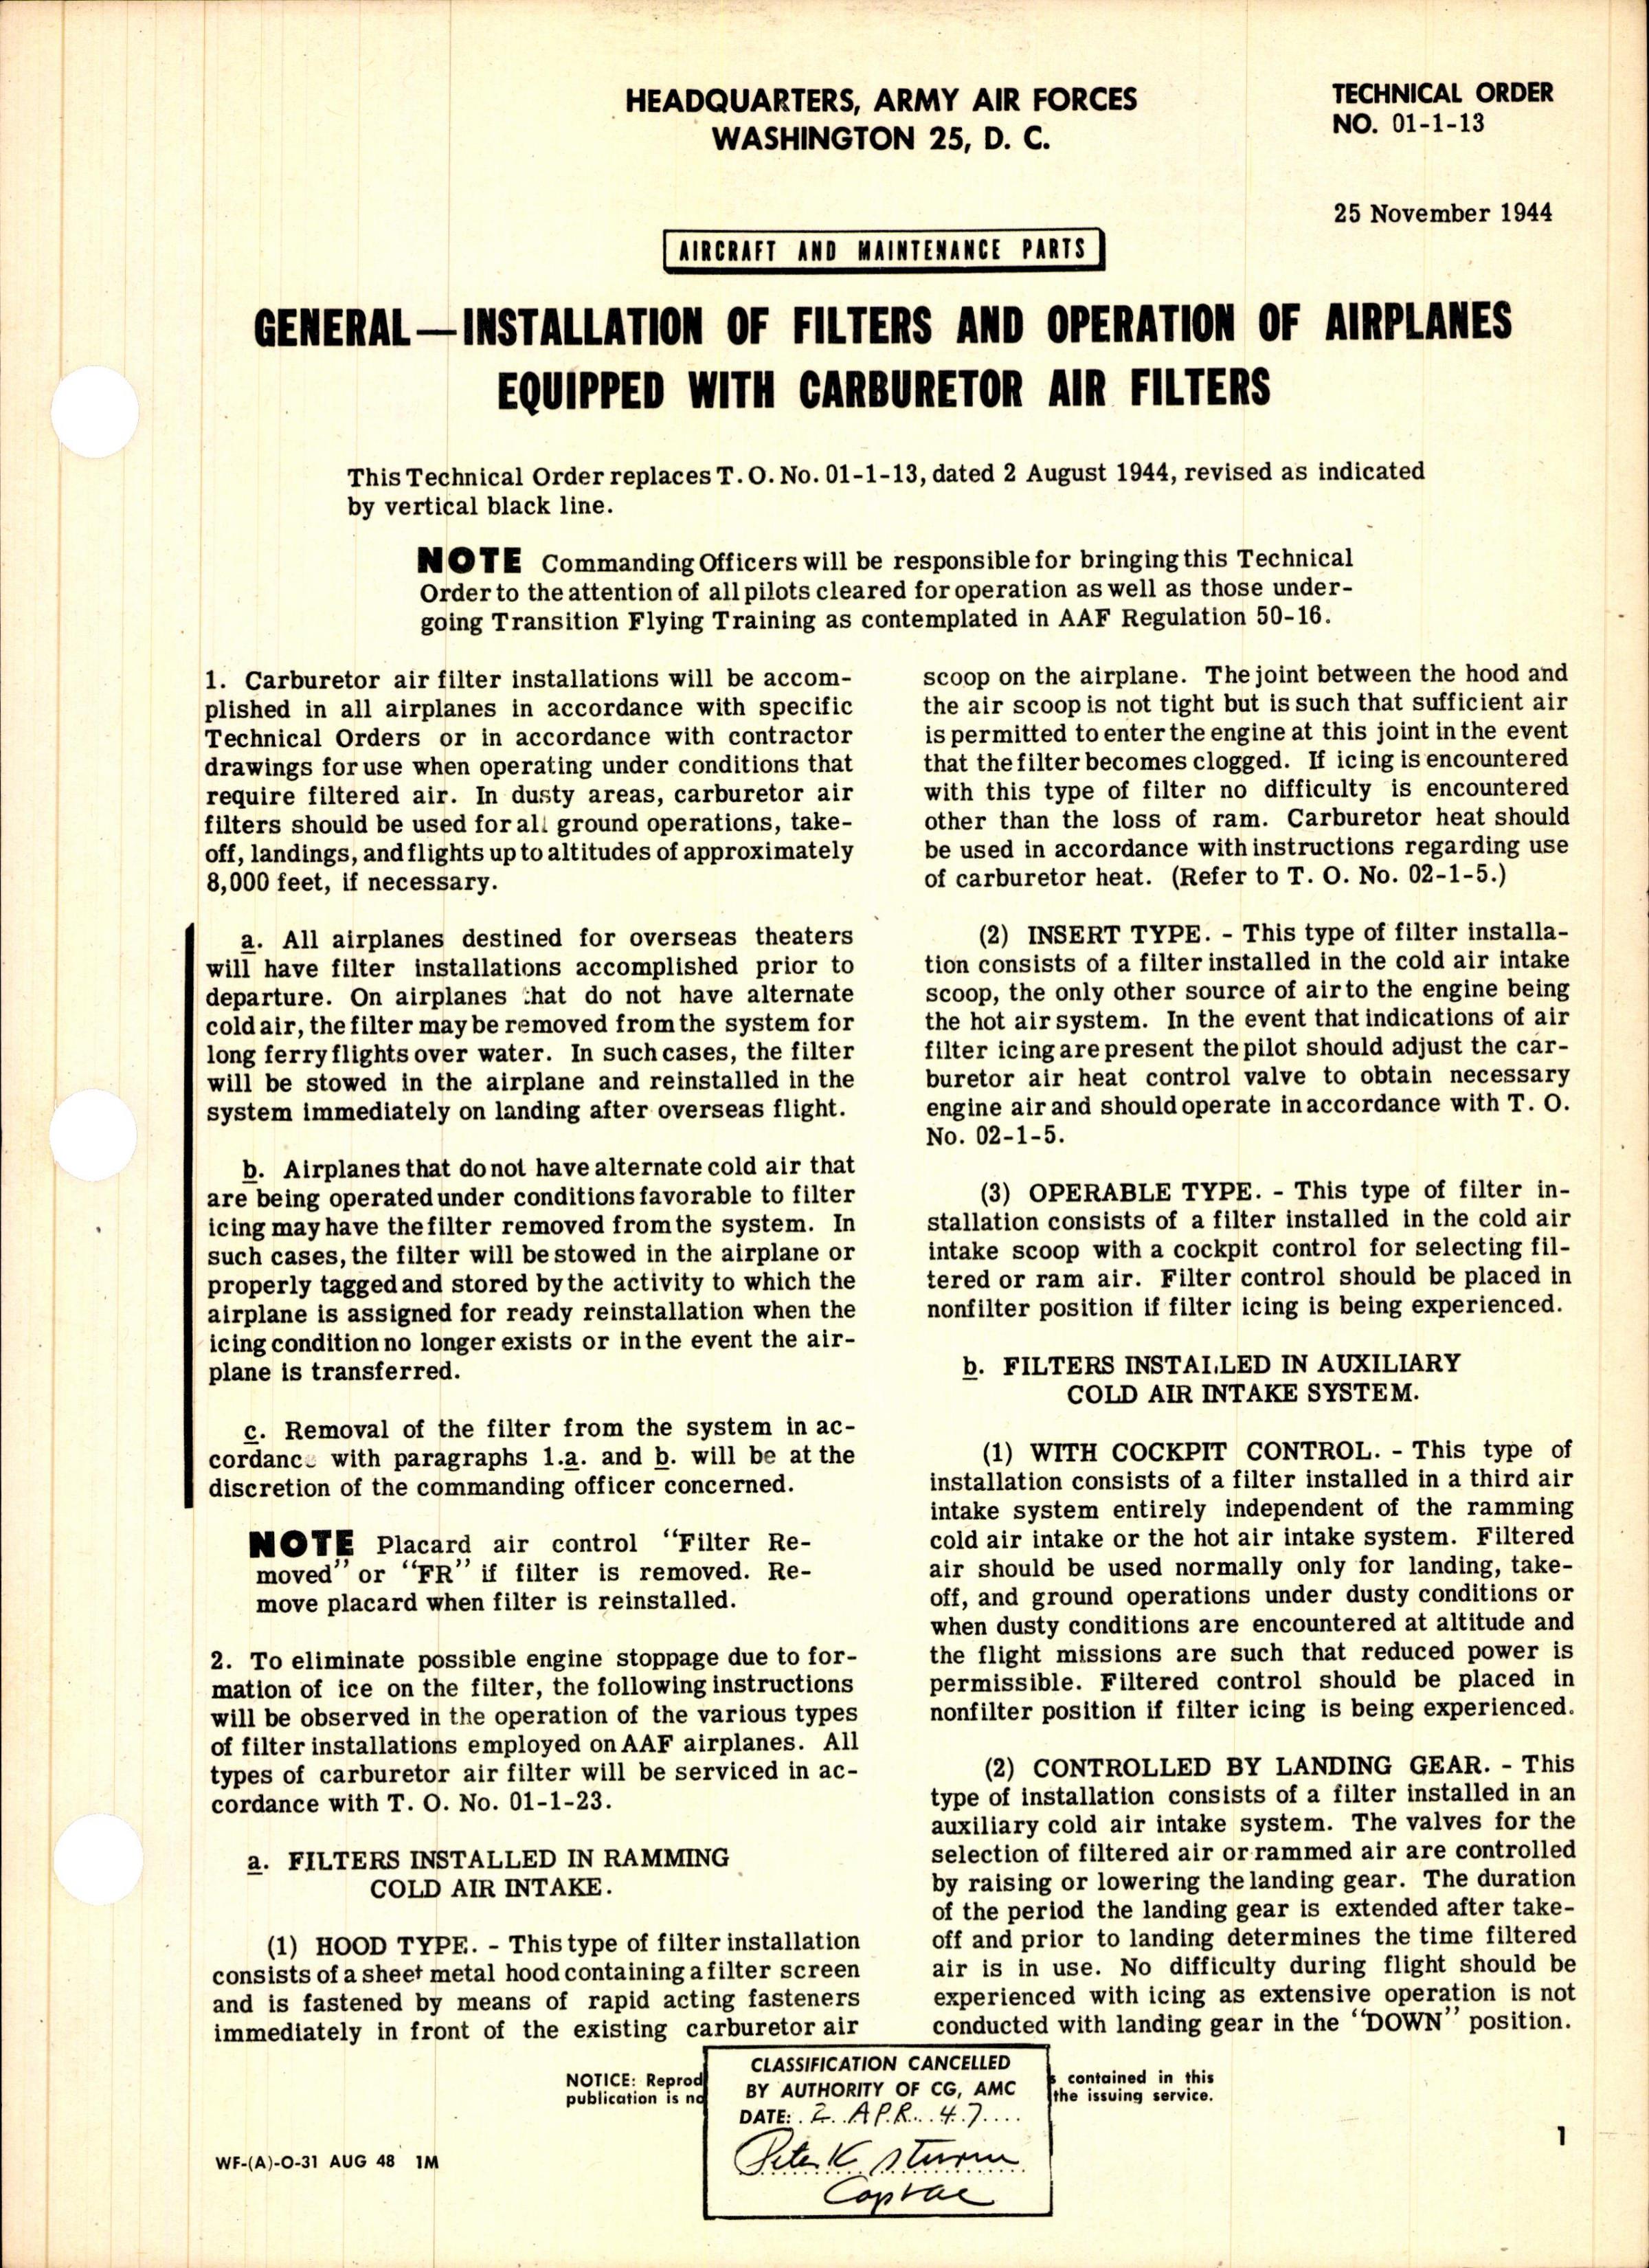 Sample page 1 from AirCorps Library document: Installation of Filters and Operation of Airplanes Equipped with Carburetor Air Filters